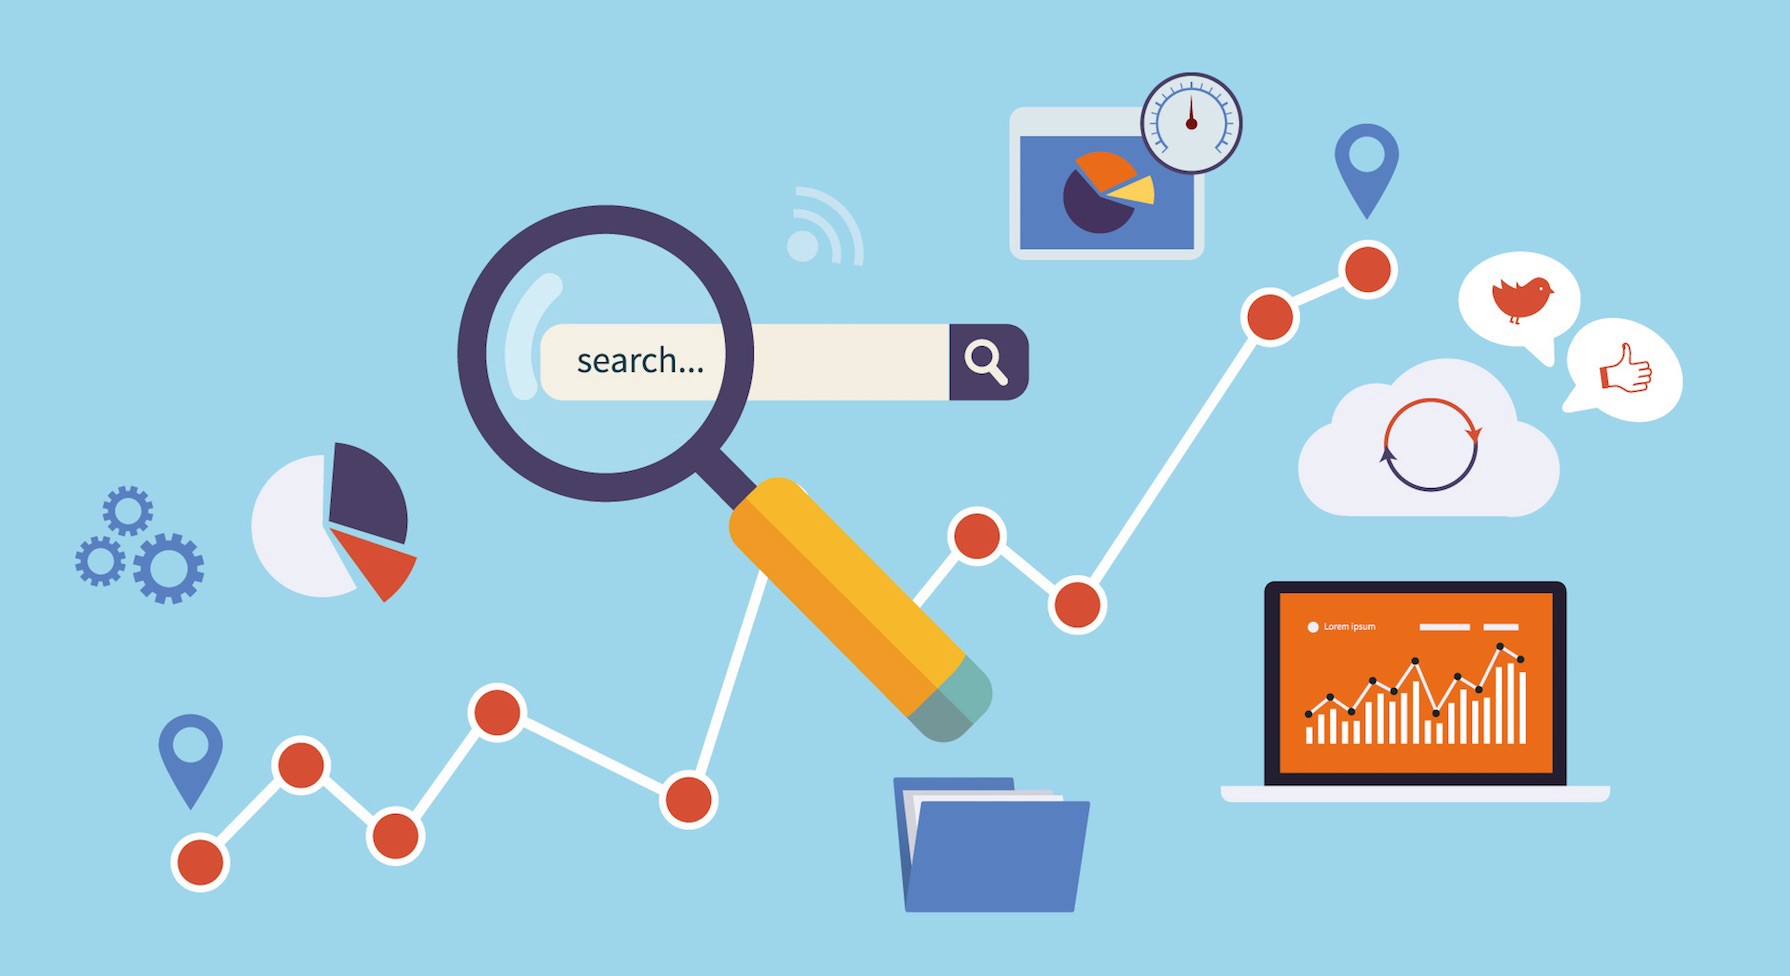 Search engine optimization is more important than ever